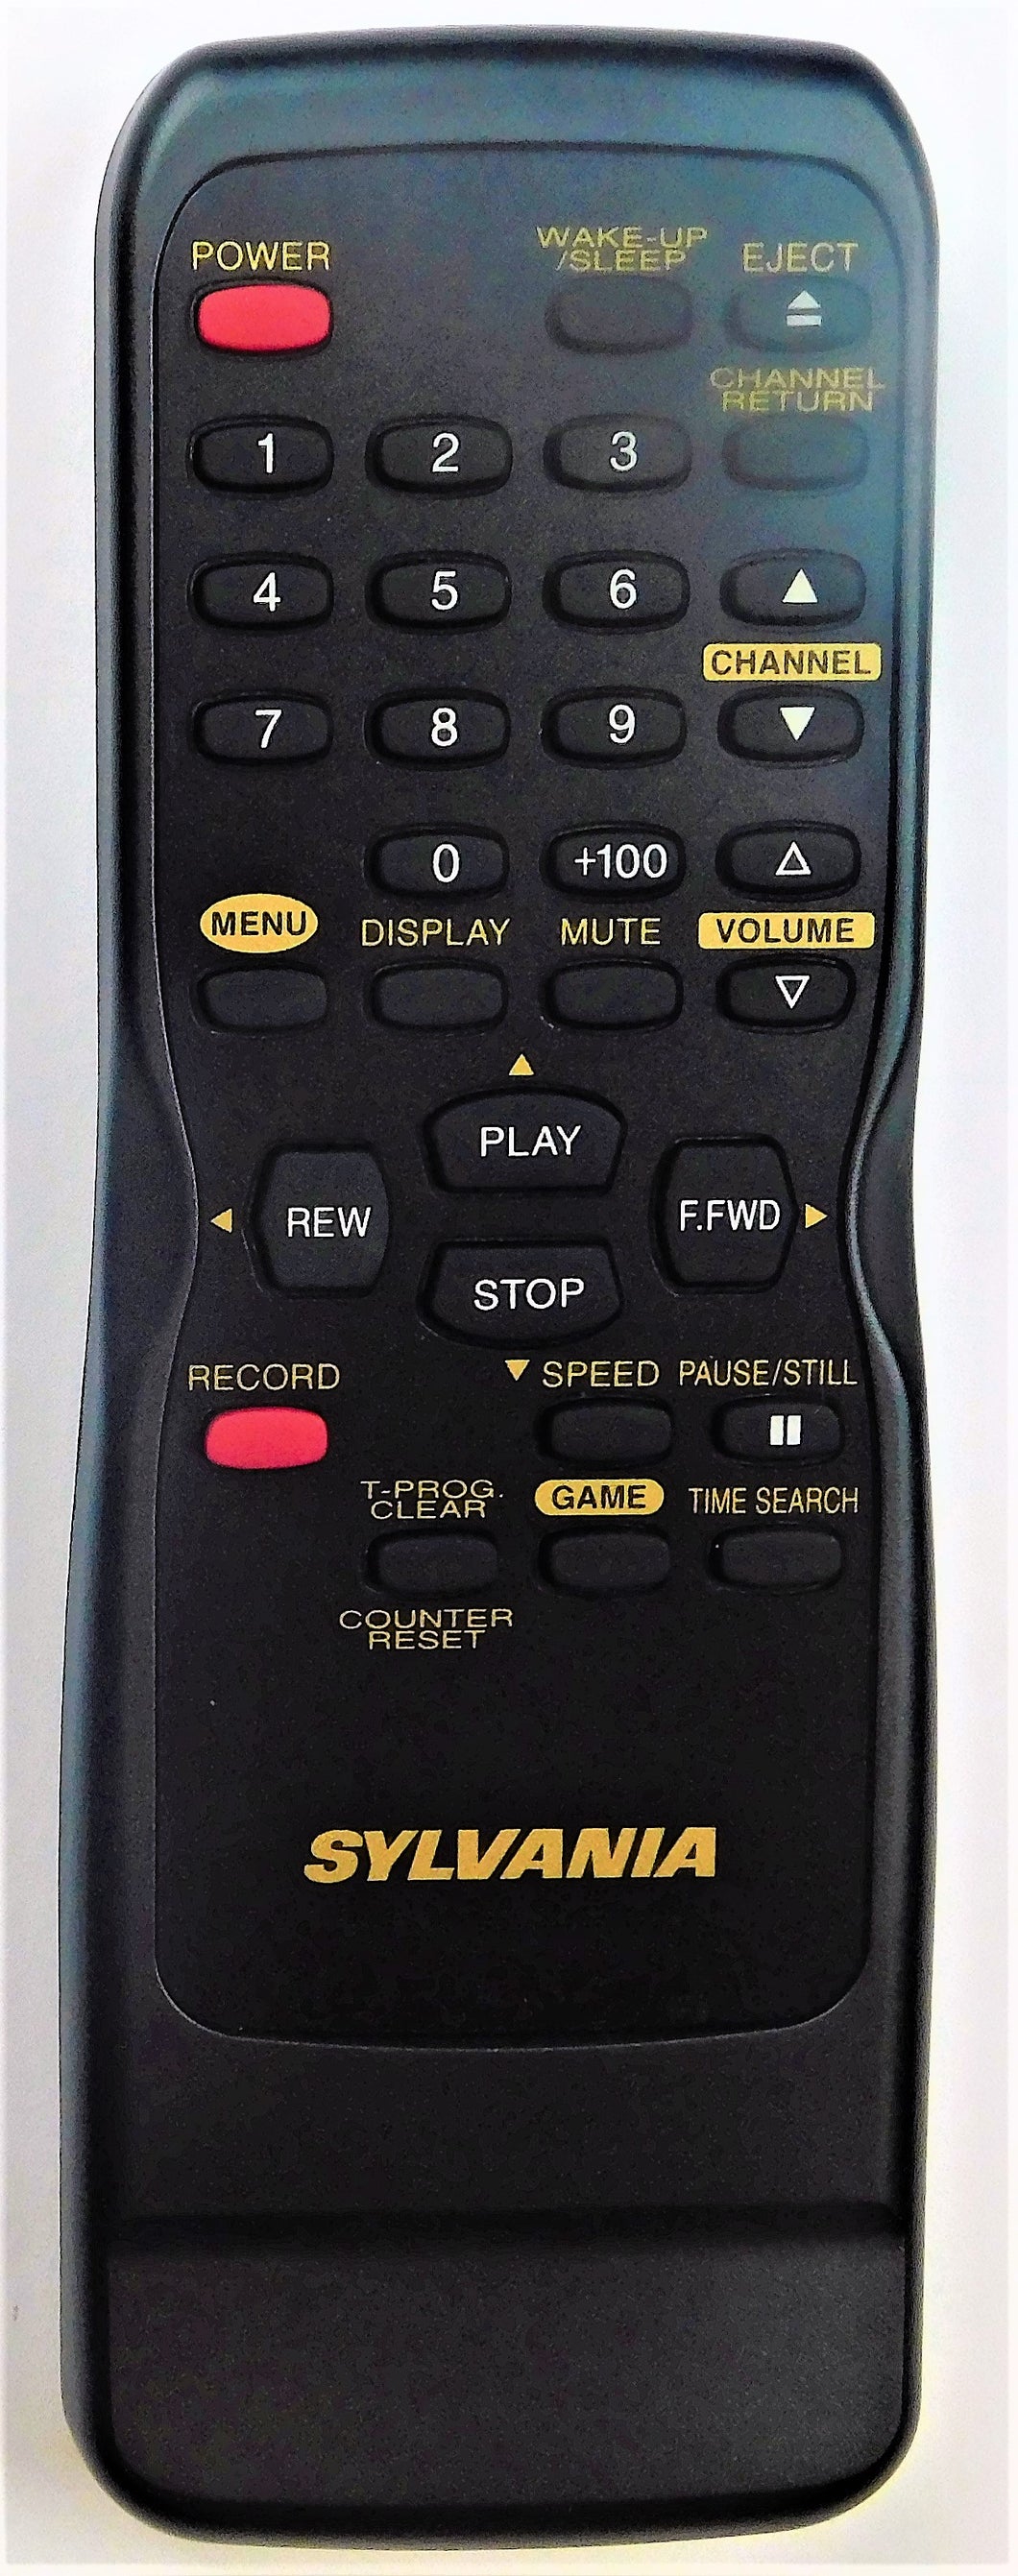 OEM replacement remote control for Sylvania CRT TV & VCR COMBOs N0123UD